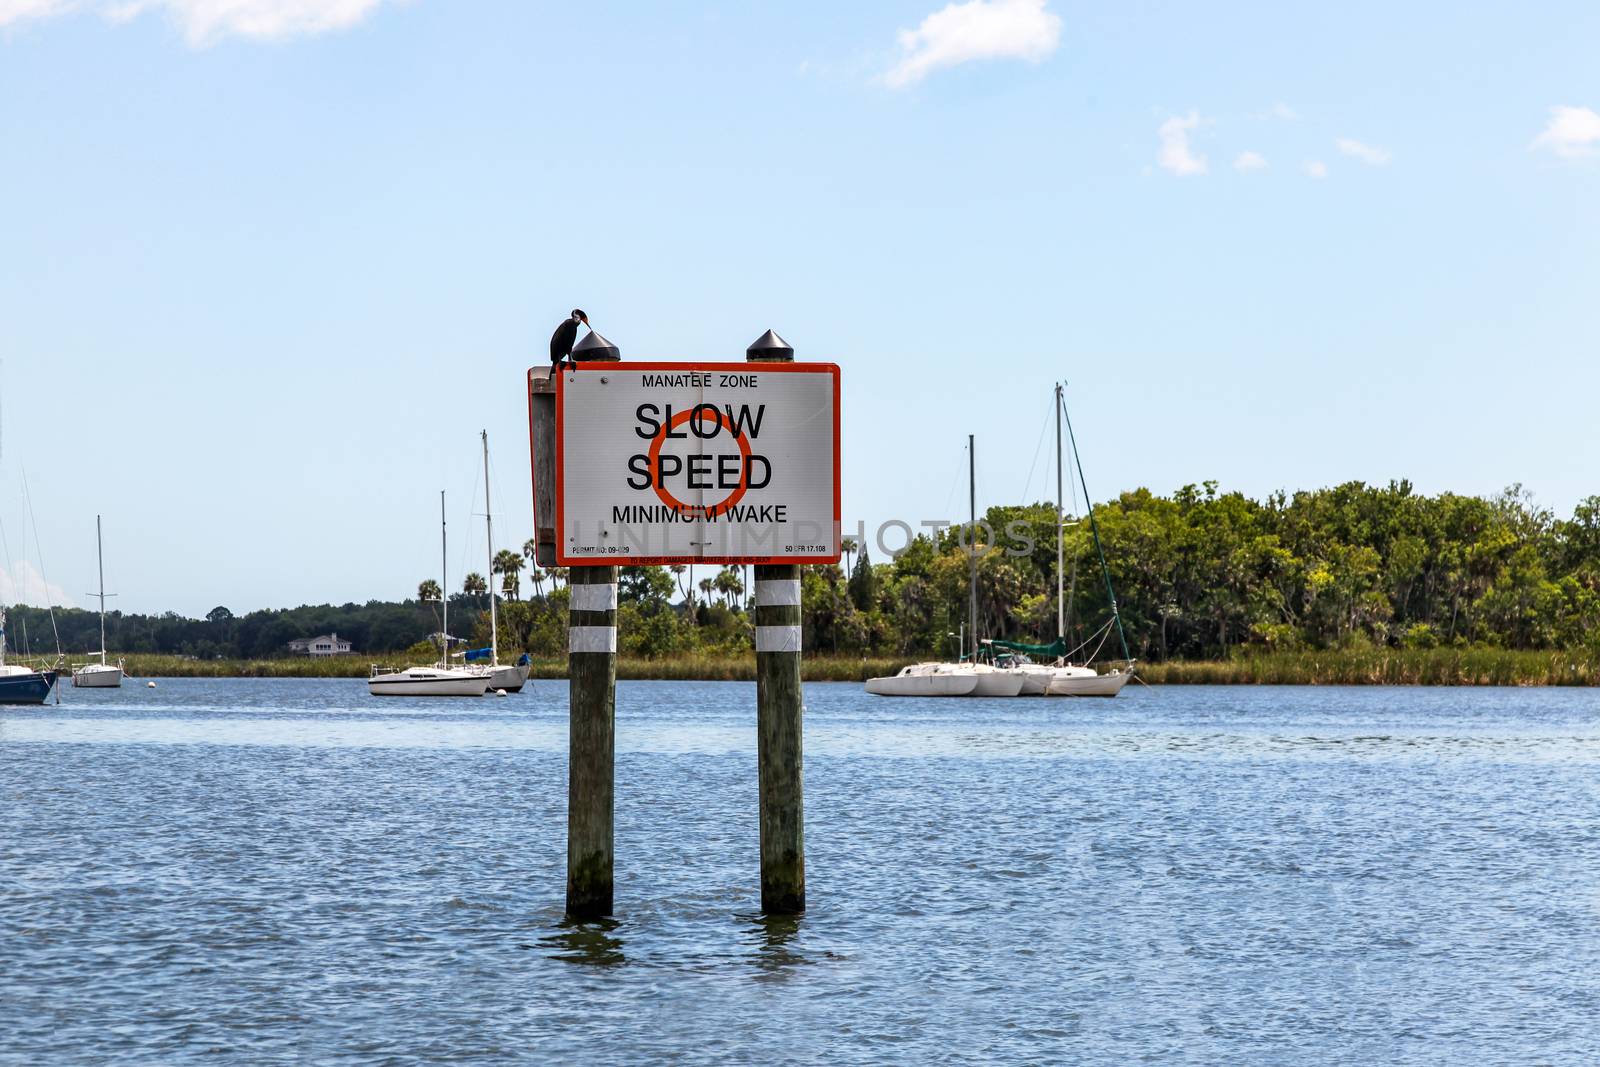 A slow speed warning sign in a manatee zone in Florida